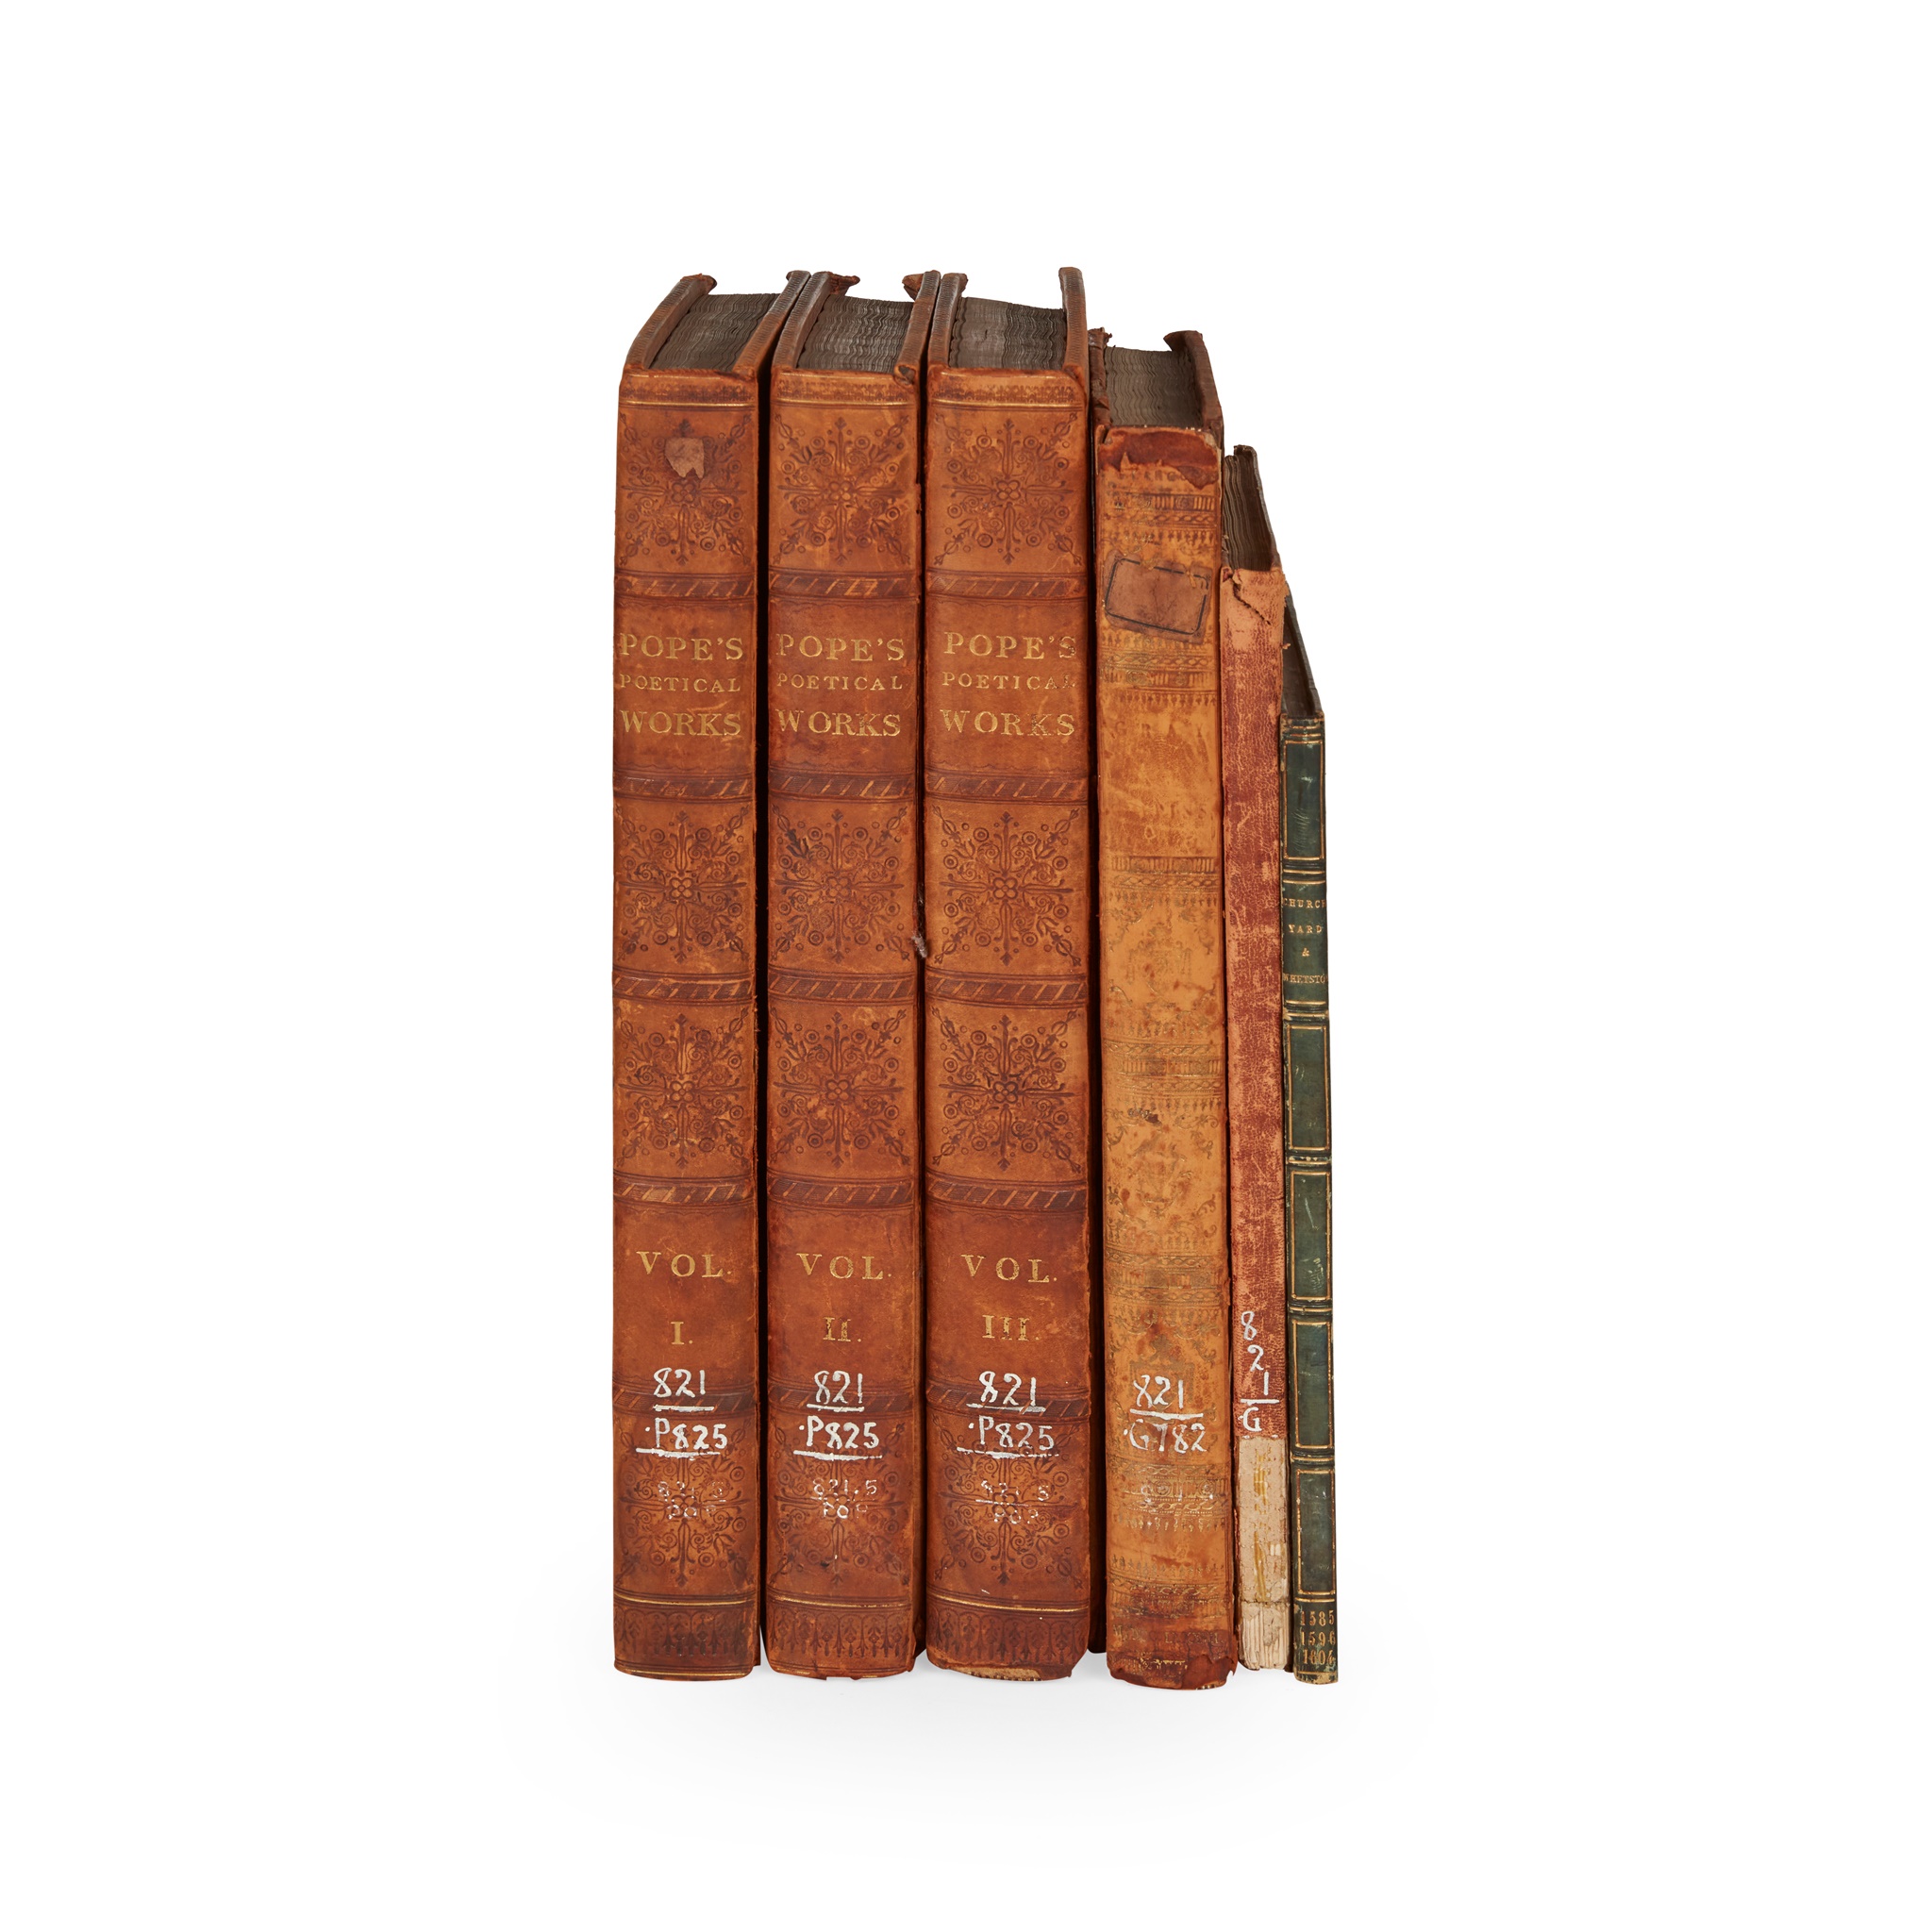 Pope, Alexander, Thomas Gray and others A collection of four works in six volumes, comprising